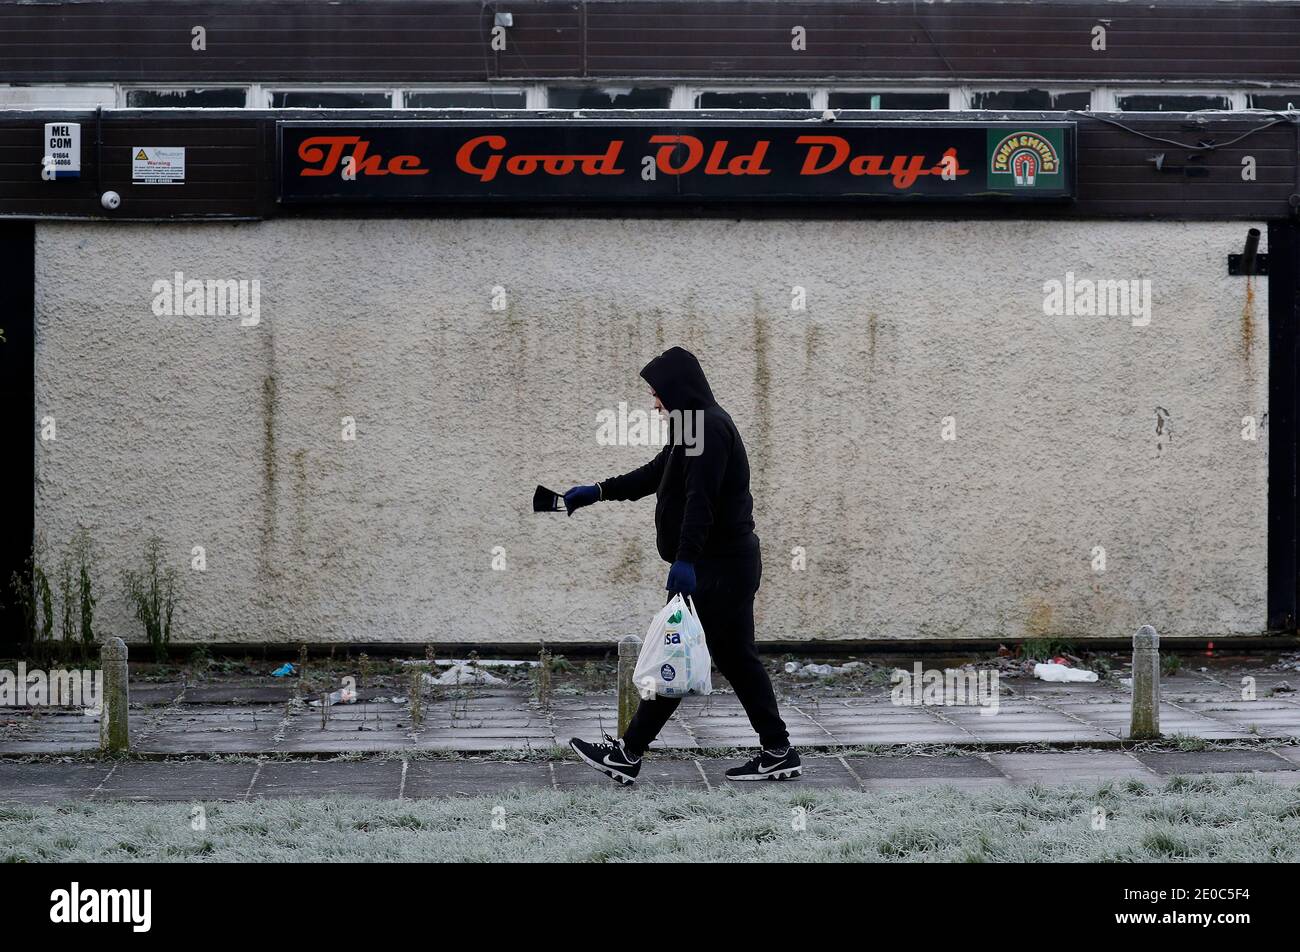 Leicester, Leicestershire, UK. 31st December 2020. A man walks past a closed pub after the City wakes tier 4 of coronavirus restrictions.  Credit Darren Staples/Alamy Live News. Stock Photo